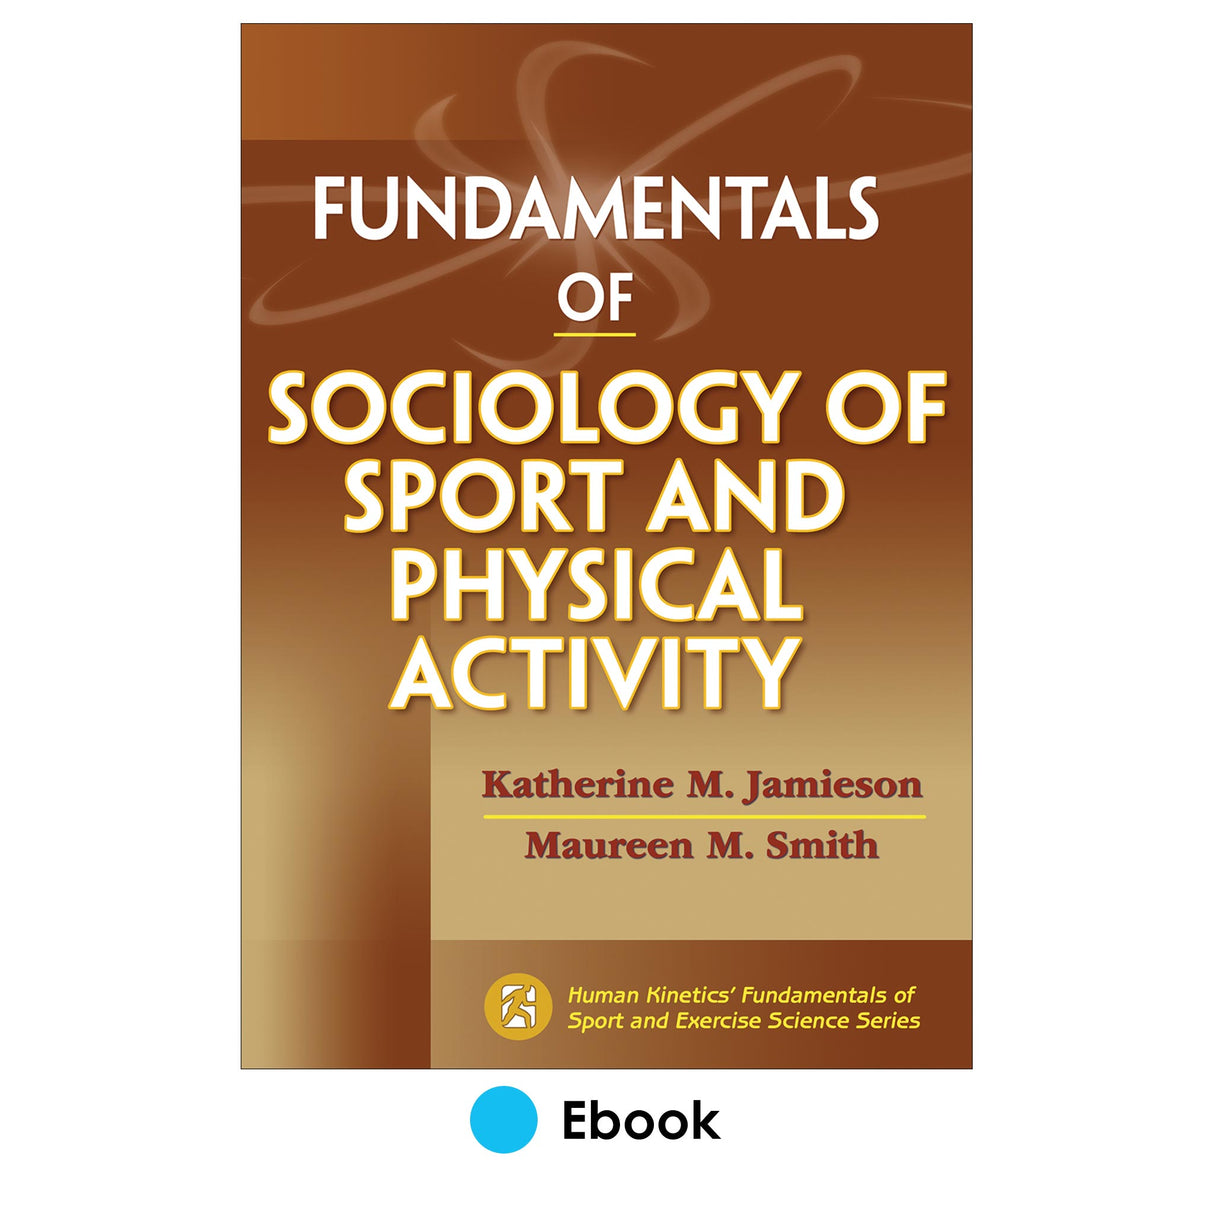 Fundamentals of Sociology of Sport and Physical Activity PDF